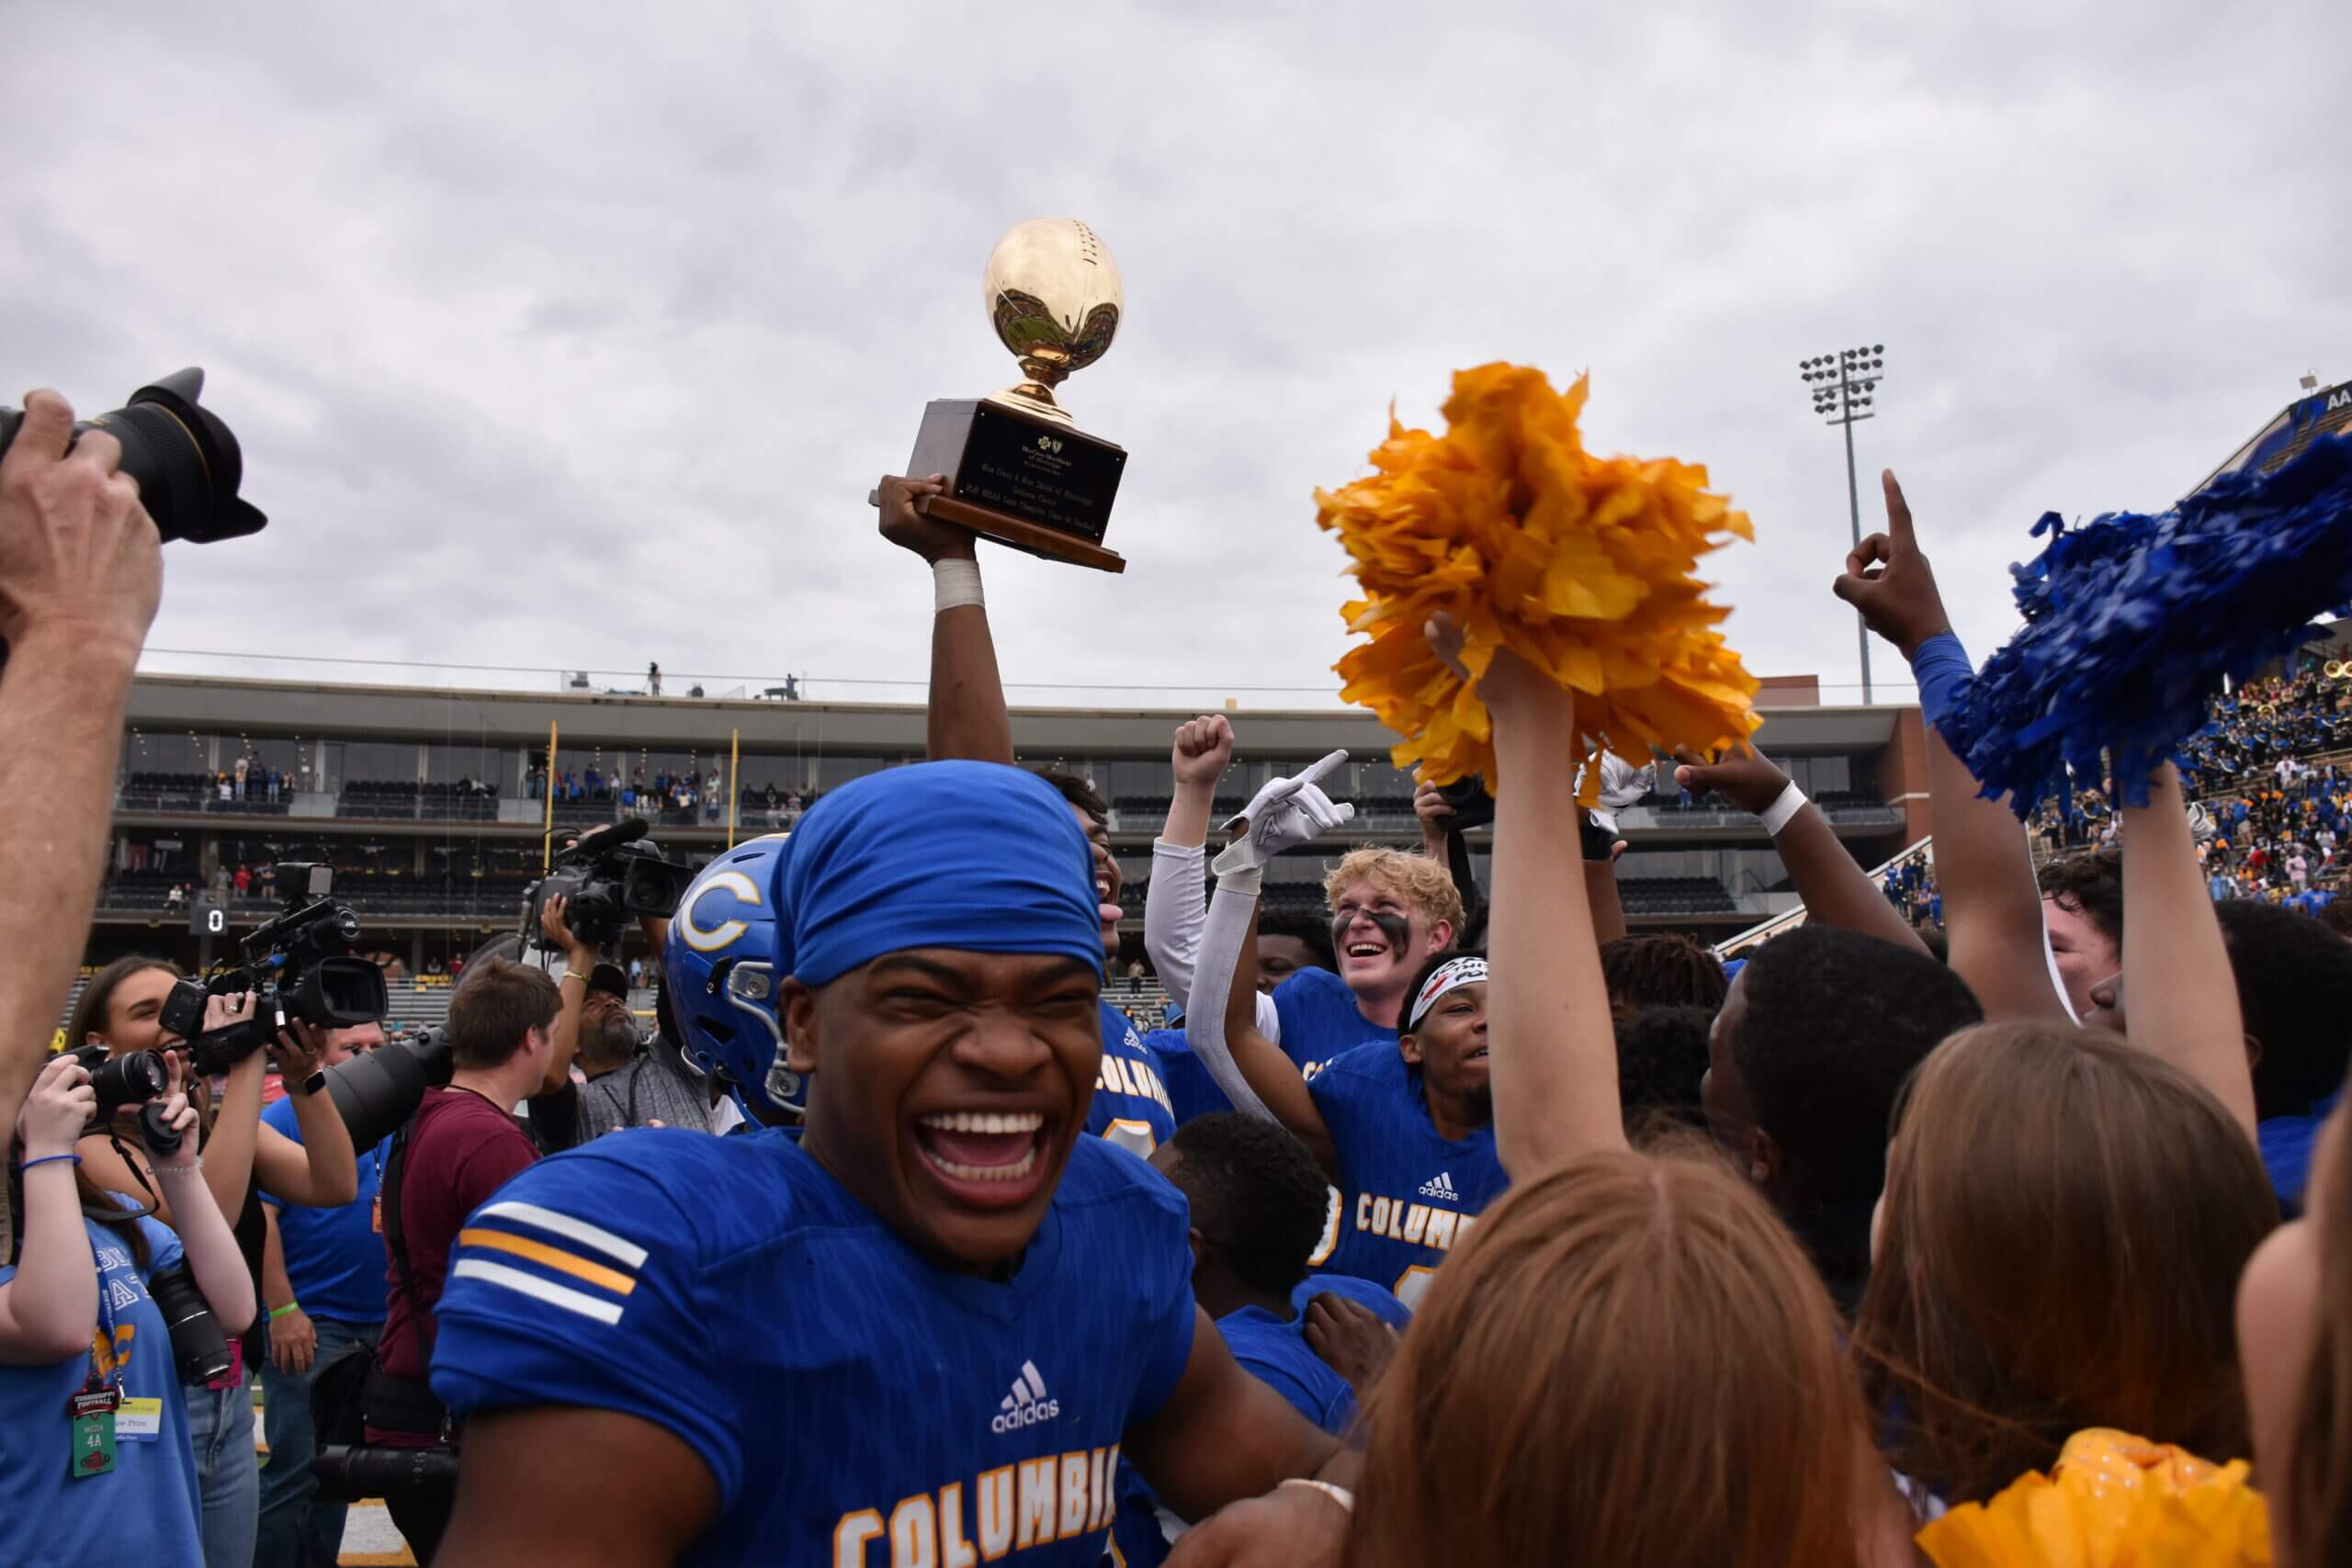 ONE LAST STAND: Columbia triumphs over Senatobia in 4A title thriller